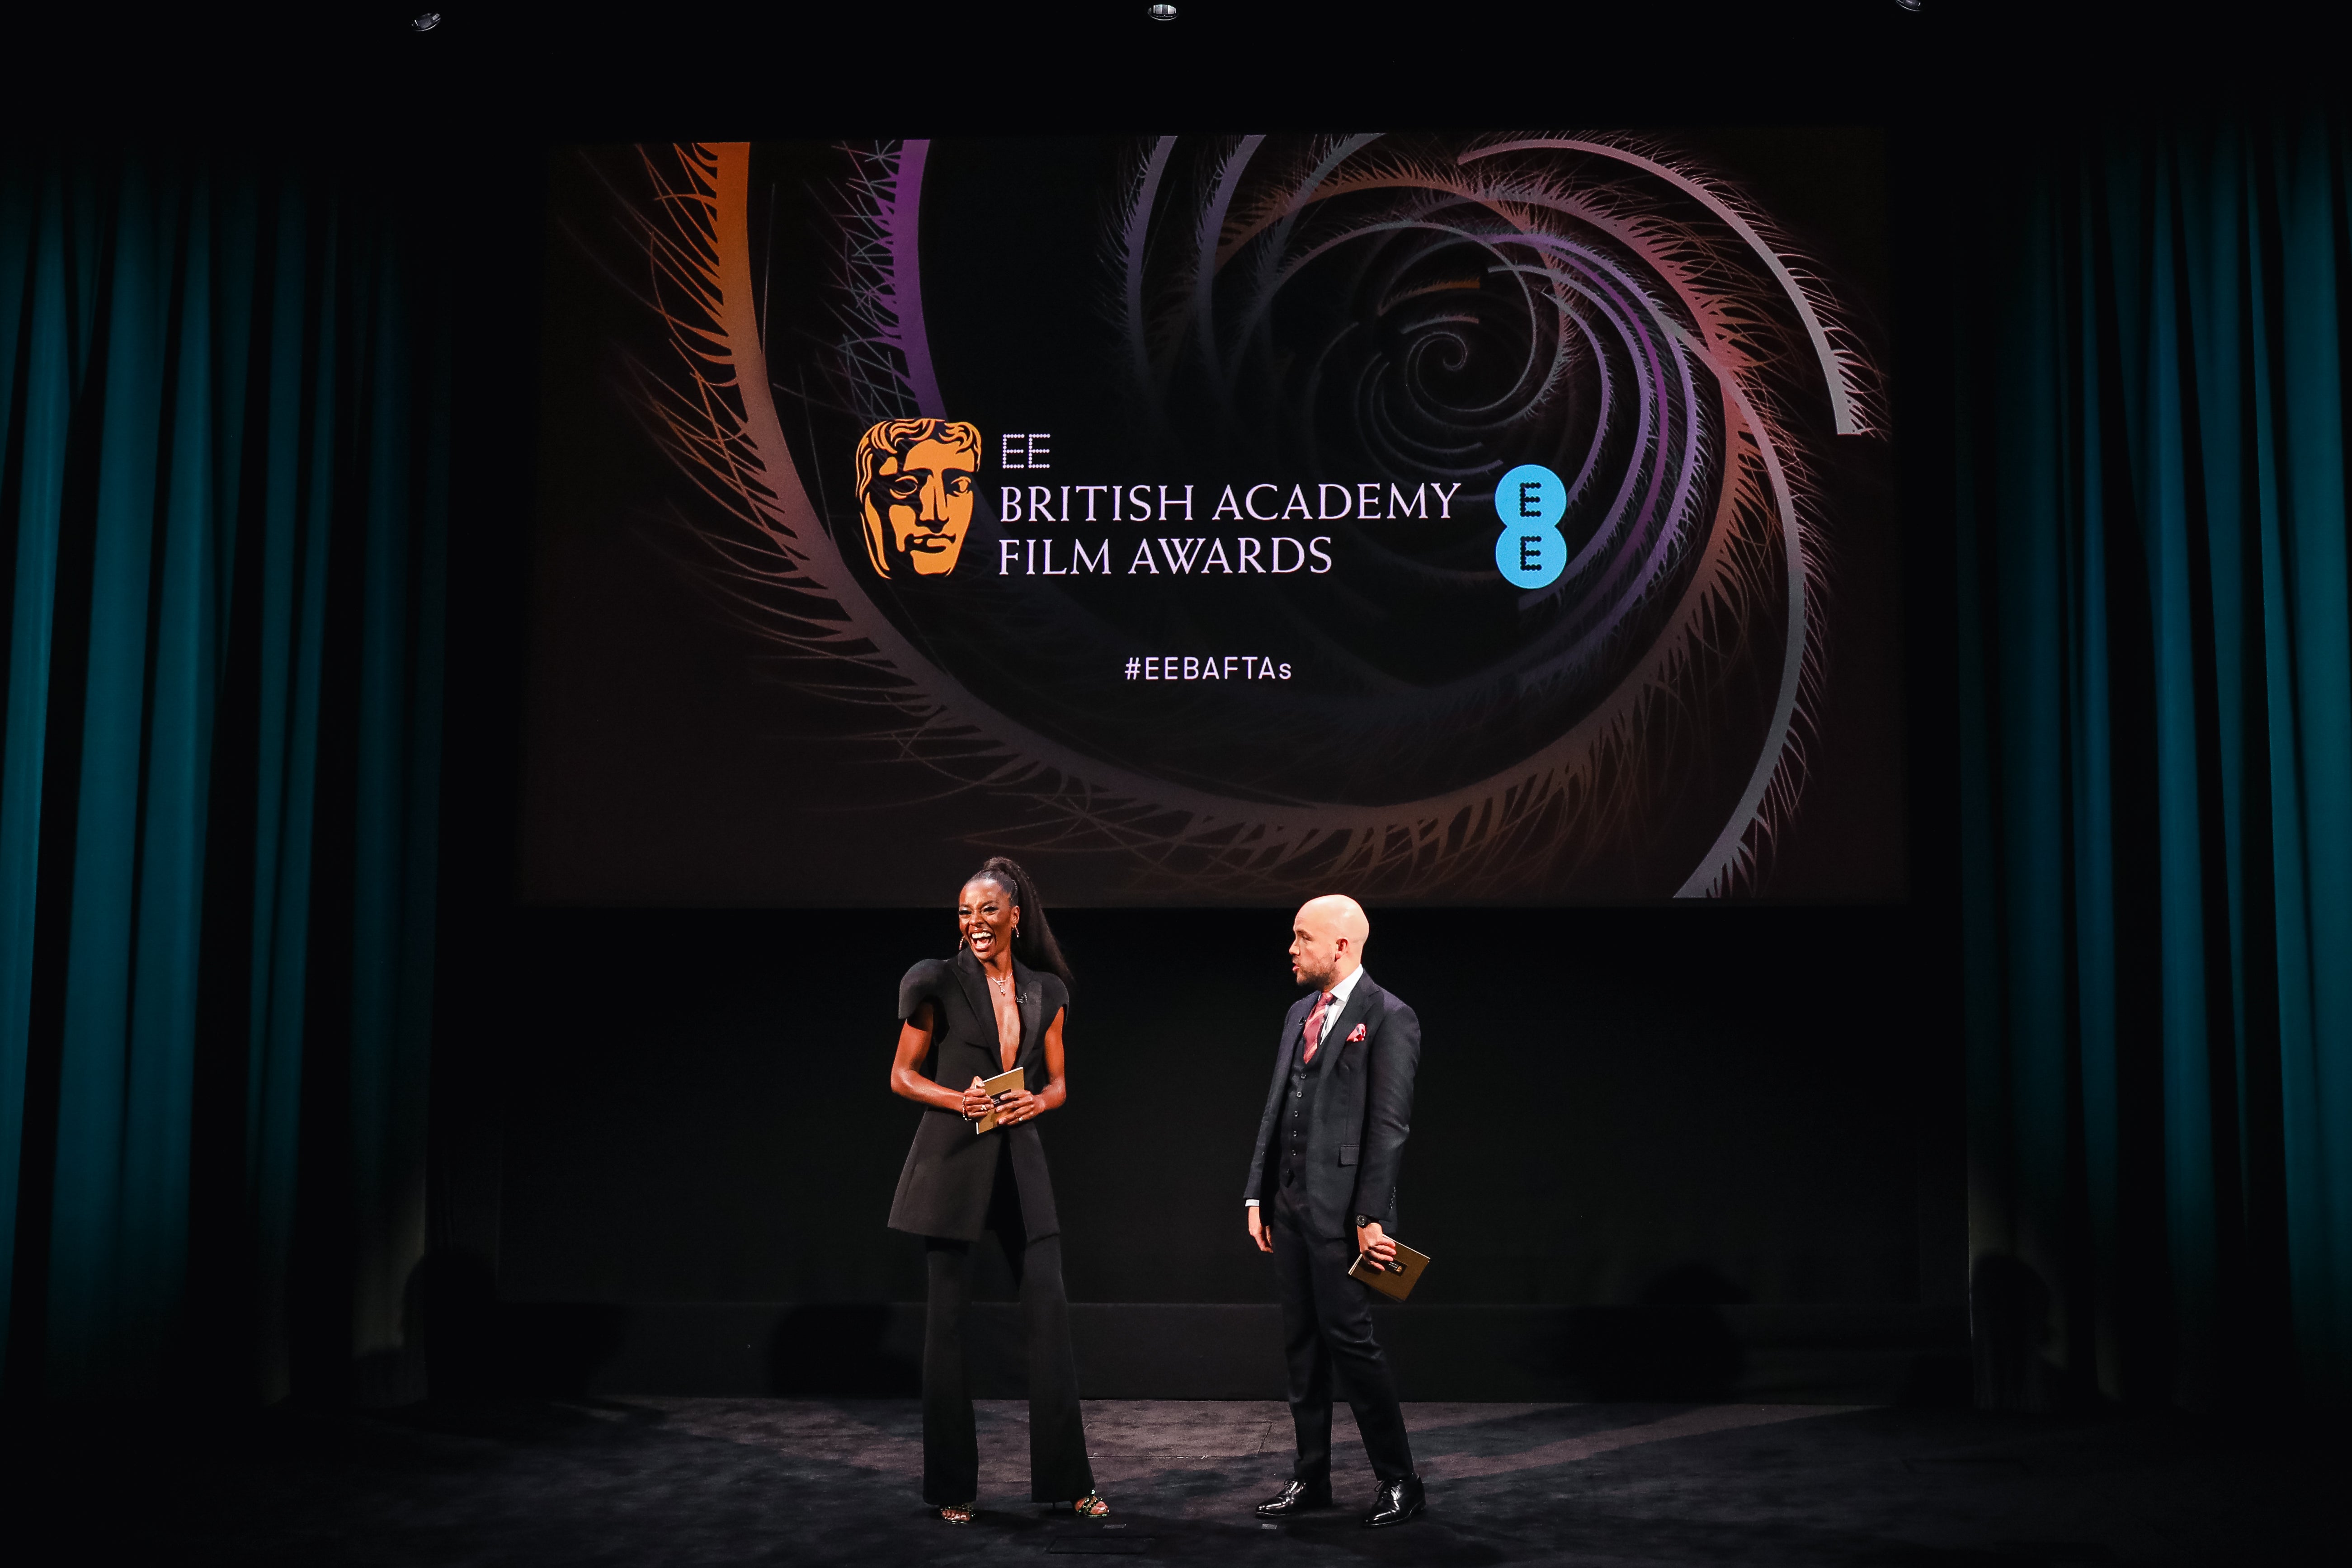 Tom Allen and AJ Odudu announce the nominations for the 2022 EE British Academy Film Awards, held at BAFTA 195 Piccadilly, London, Thursday 3 February 2022.